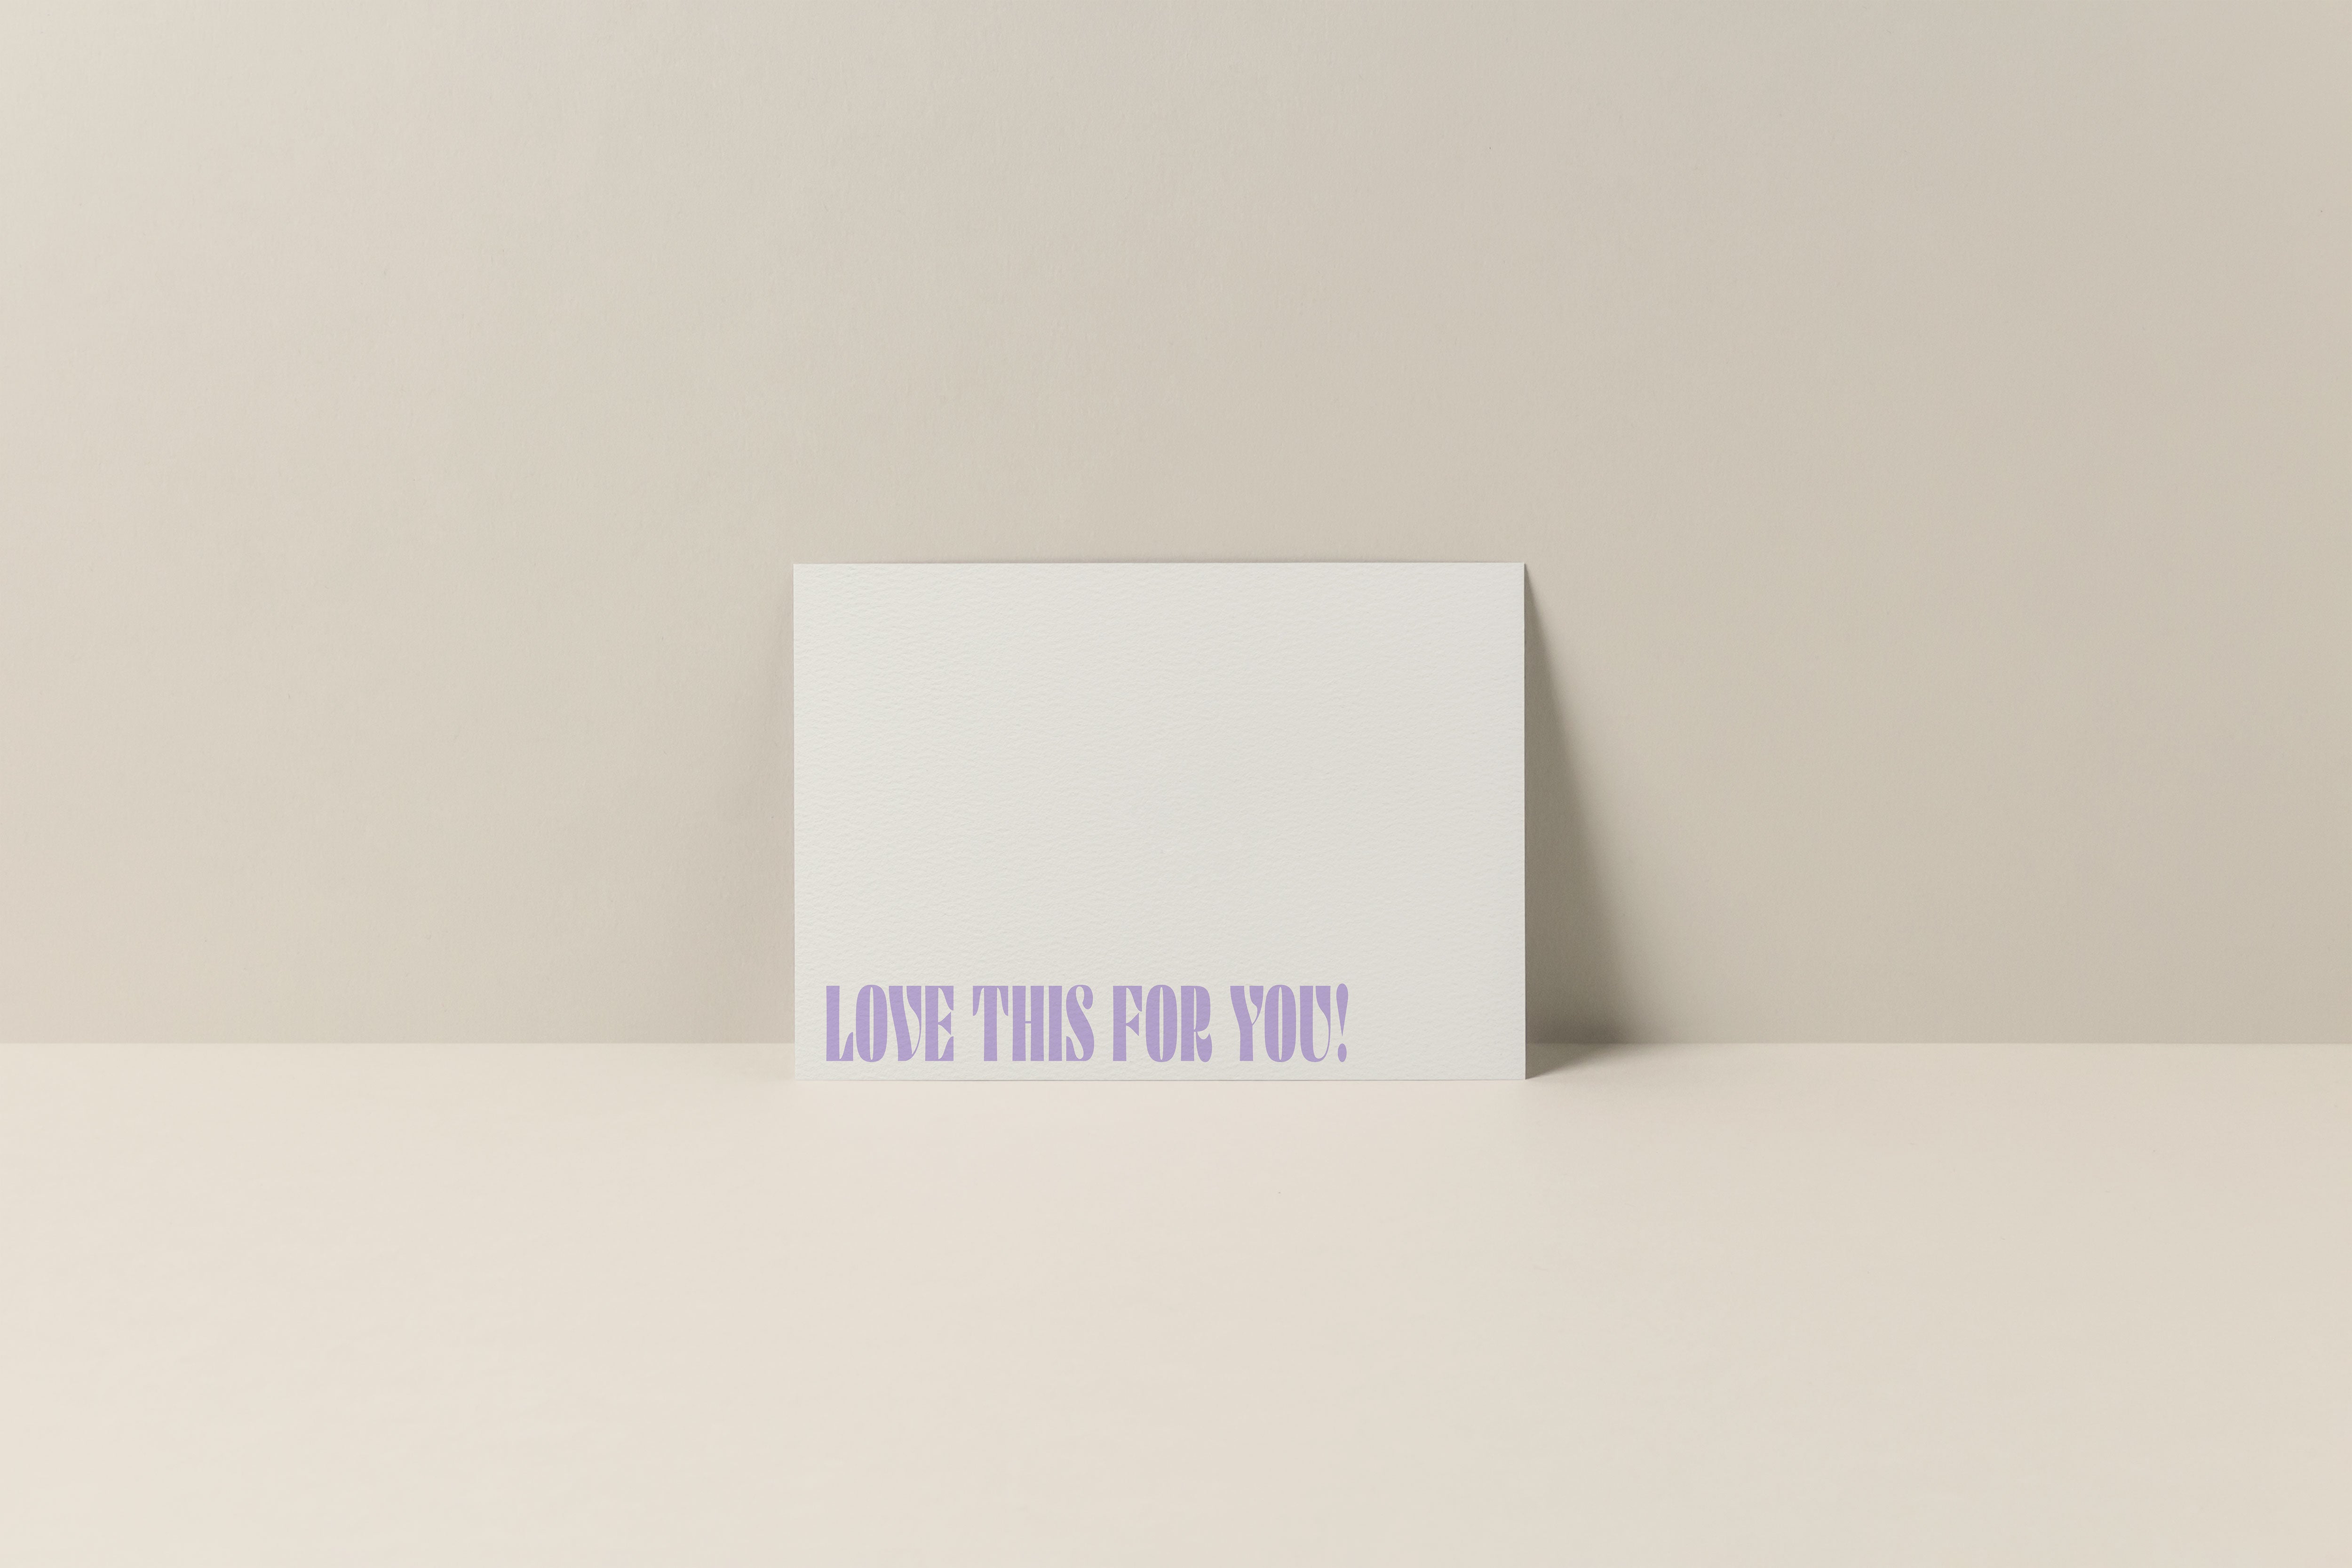 Gift Card: Love this for you!